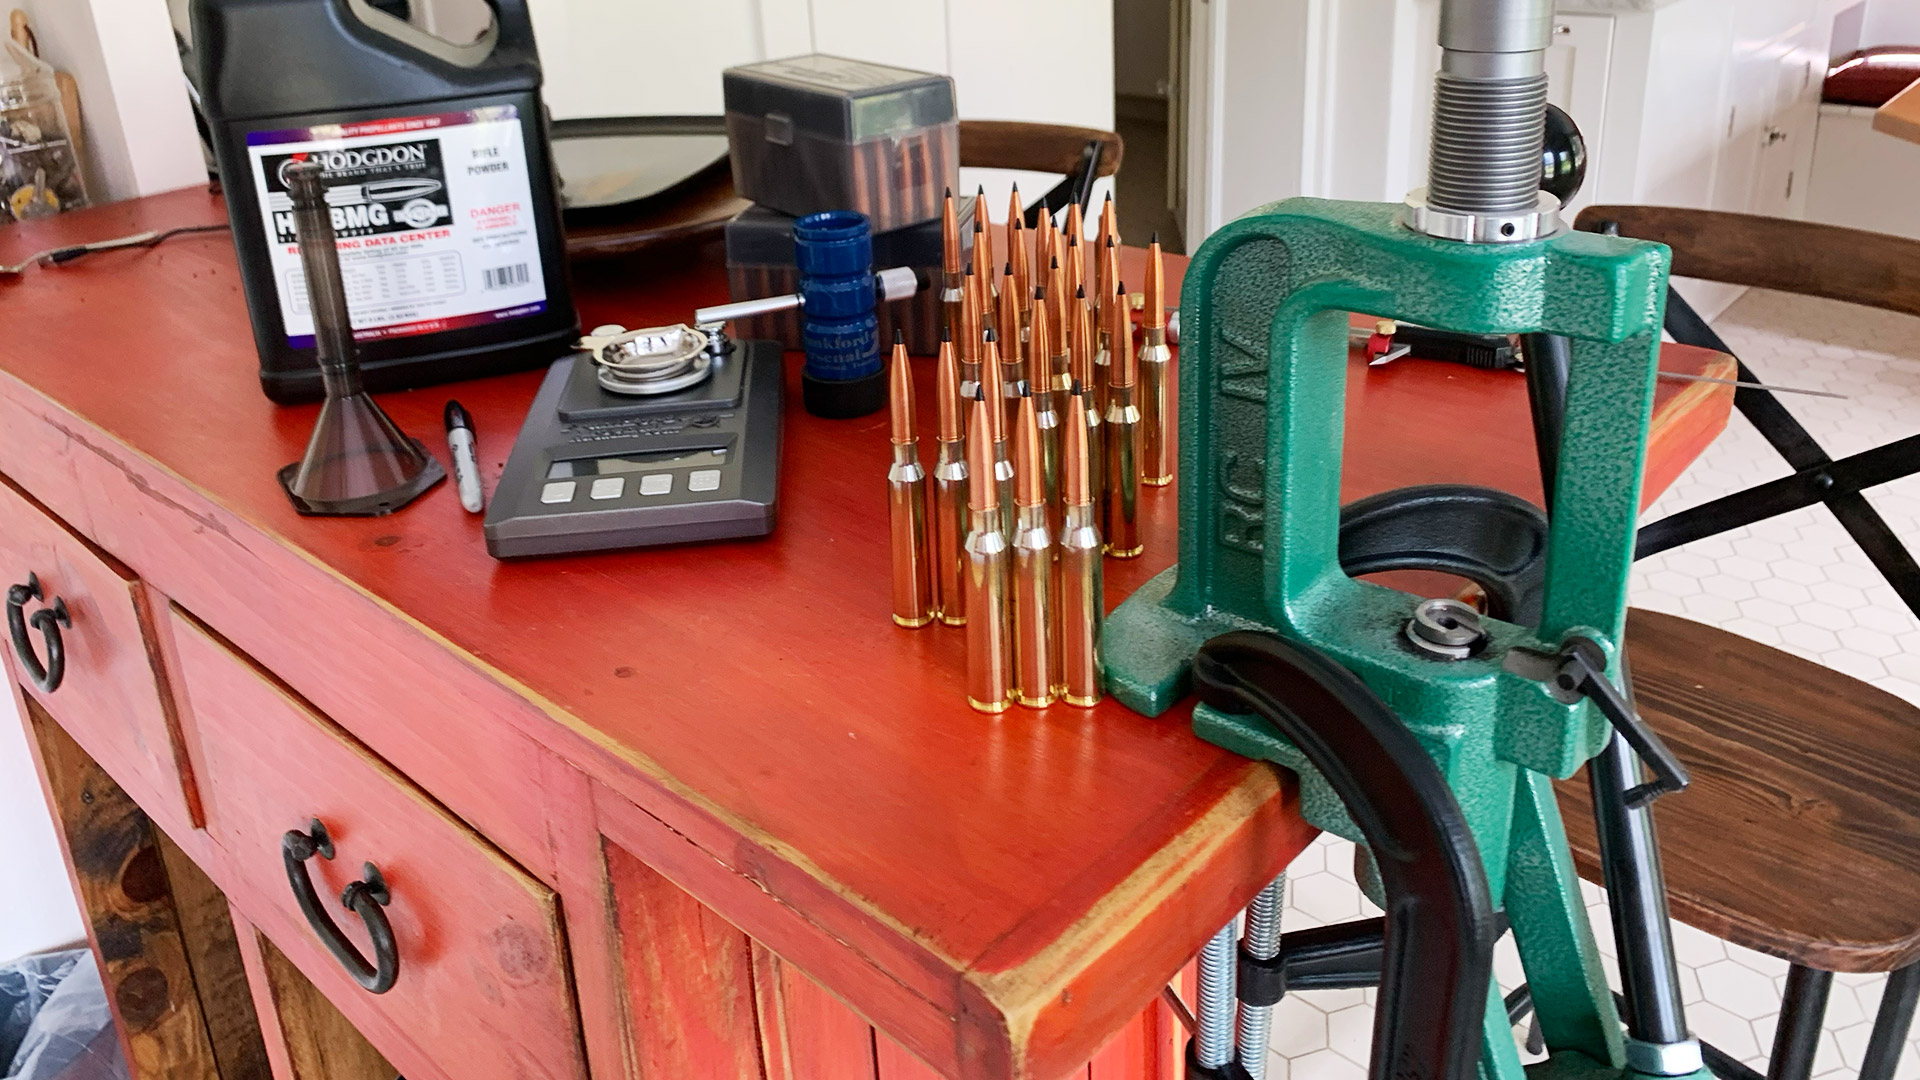 Reloading station with C-clamps